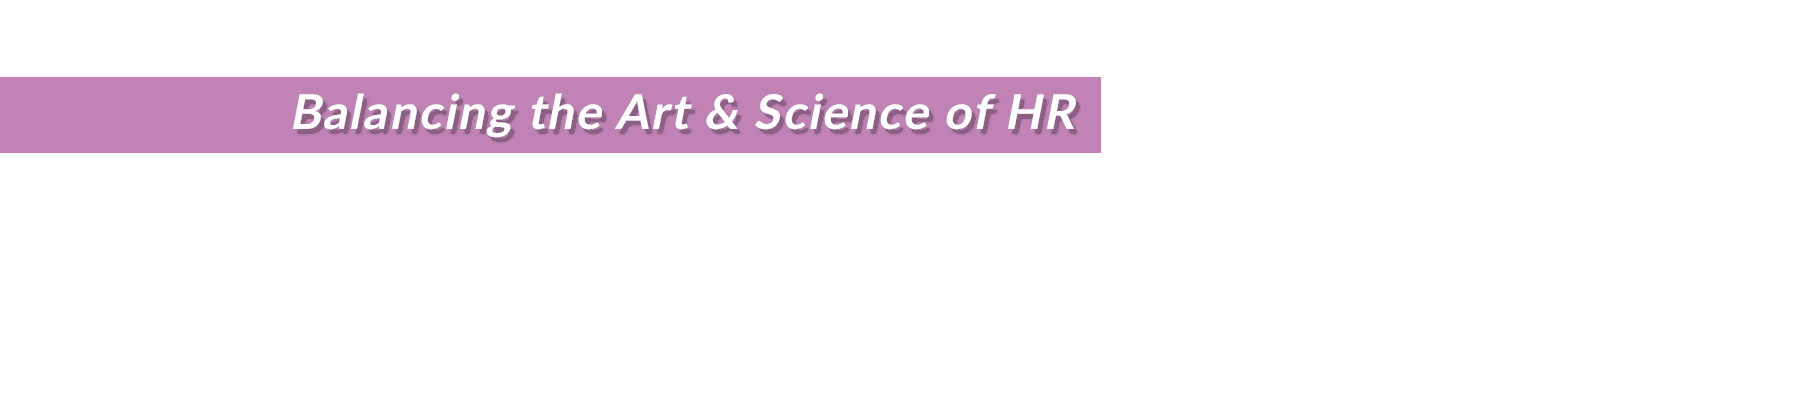 DCSI - Balancing the Art and Science of Human Resources